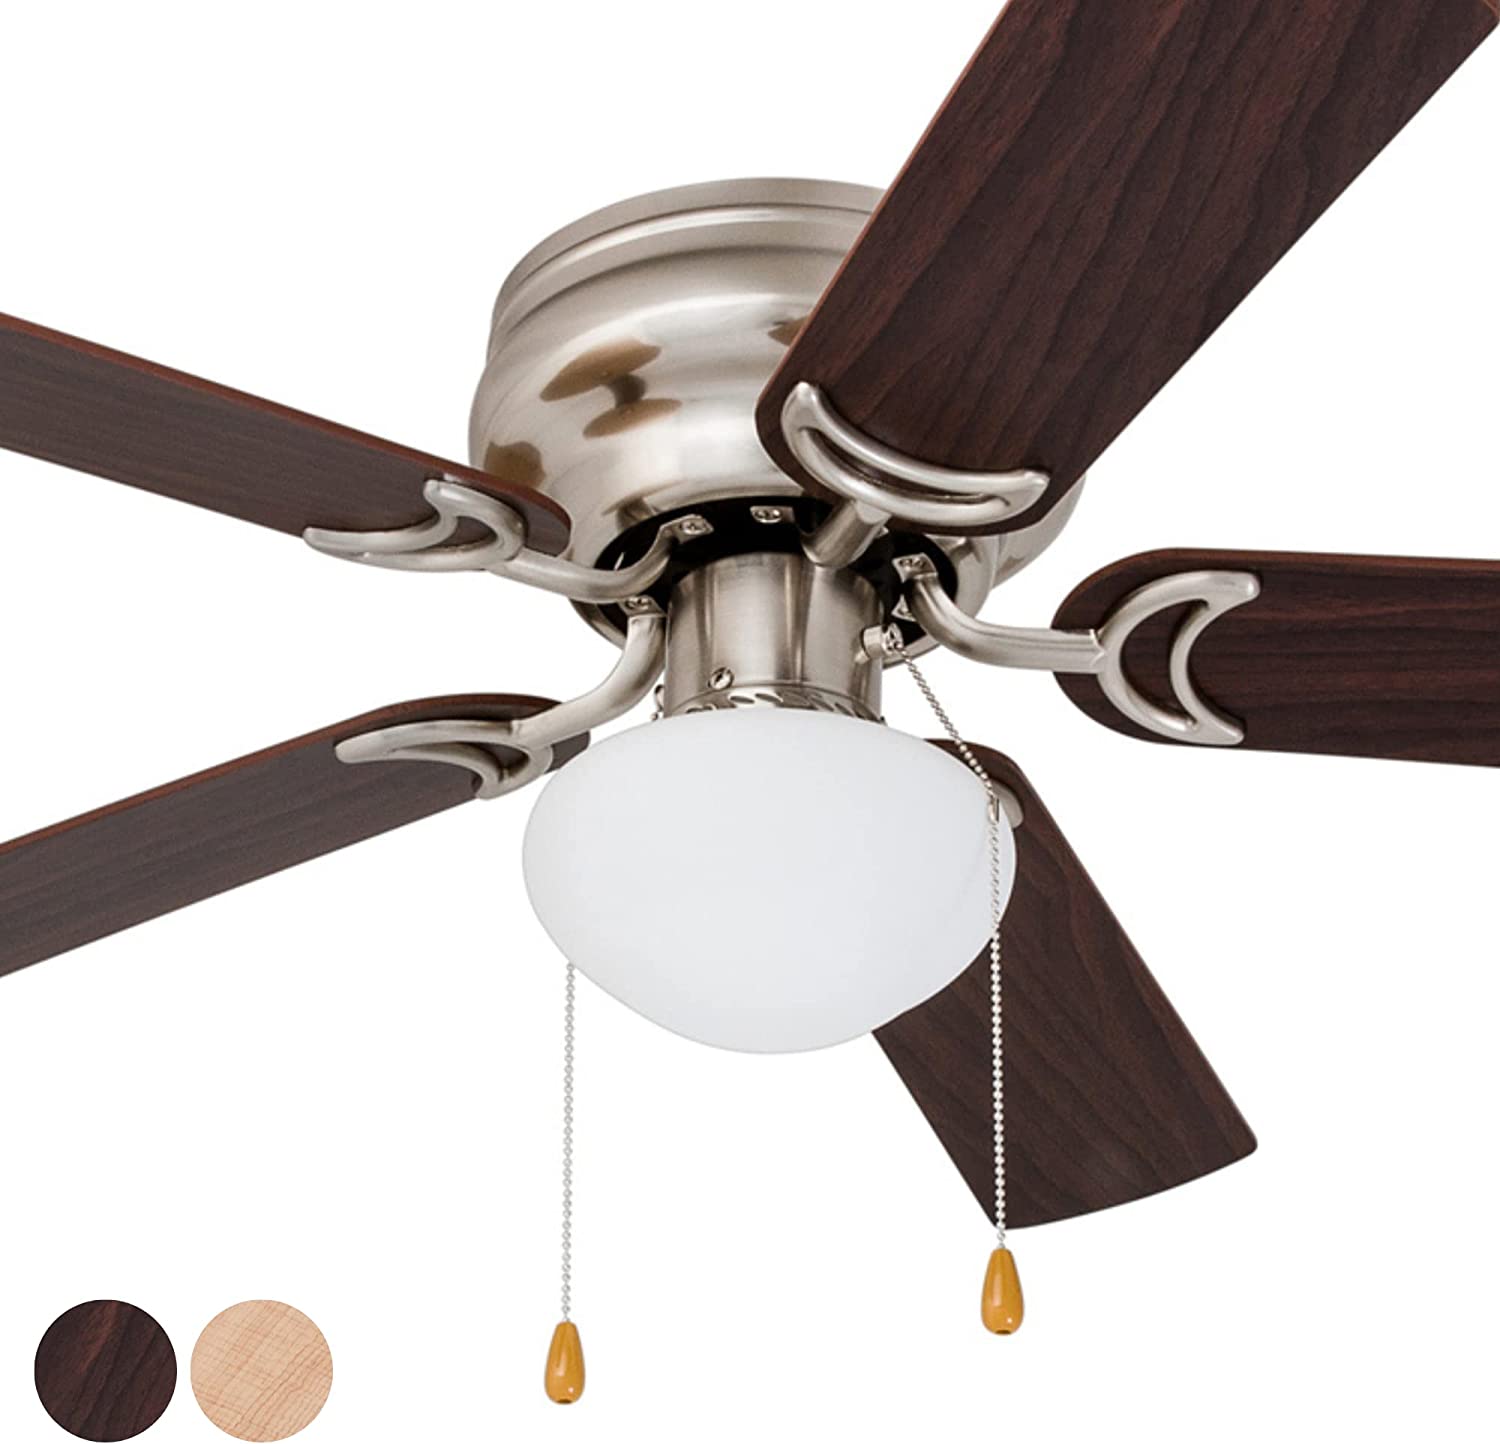 Prominence Home Alvina Reversible Ceiling Fan For Bedroom, 42-Inch